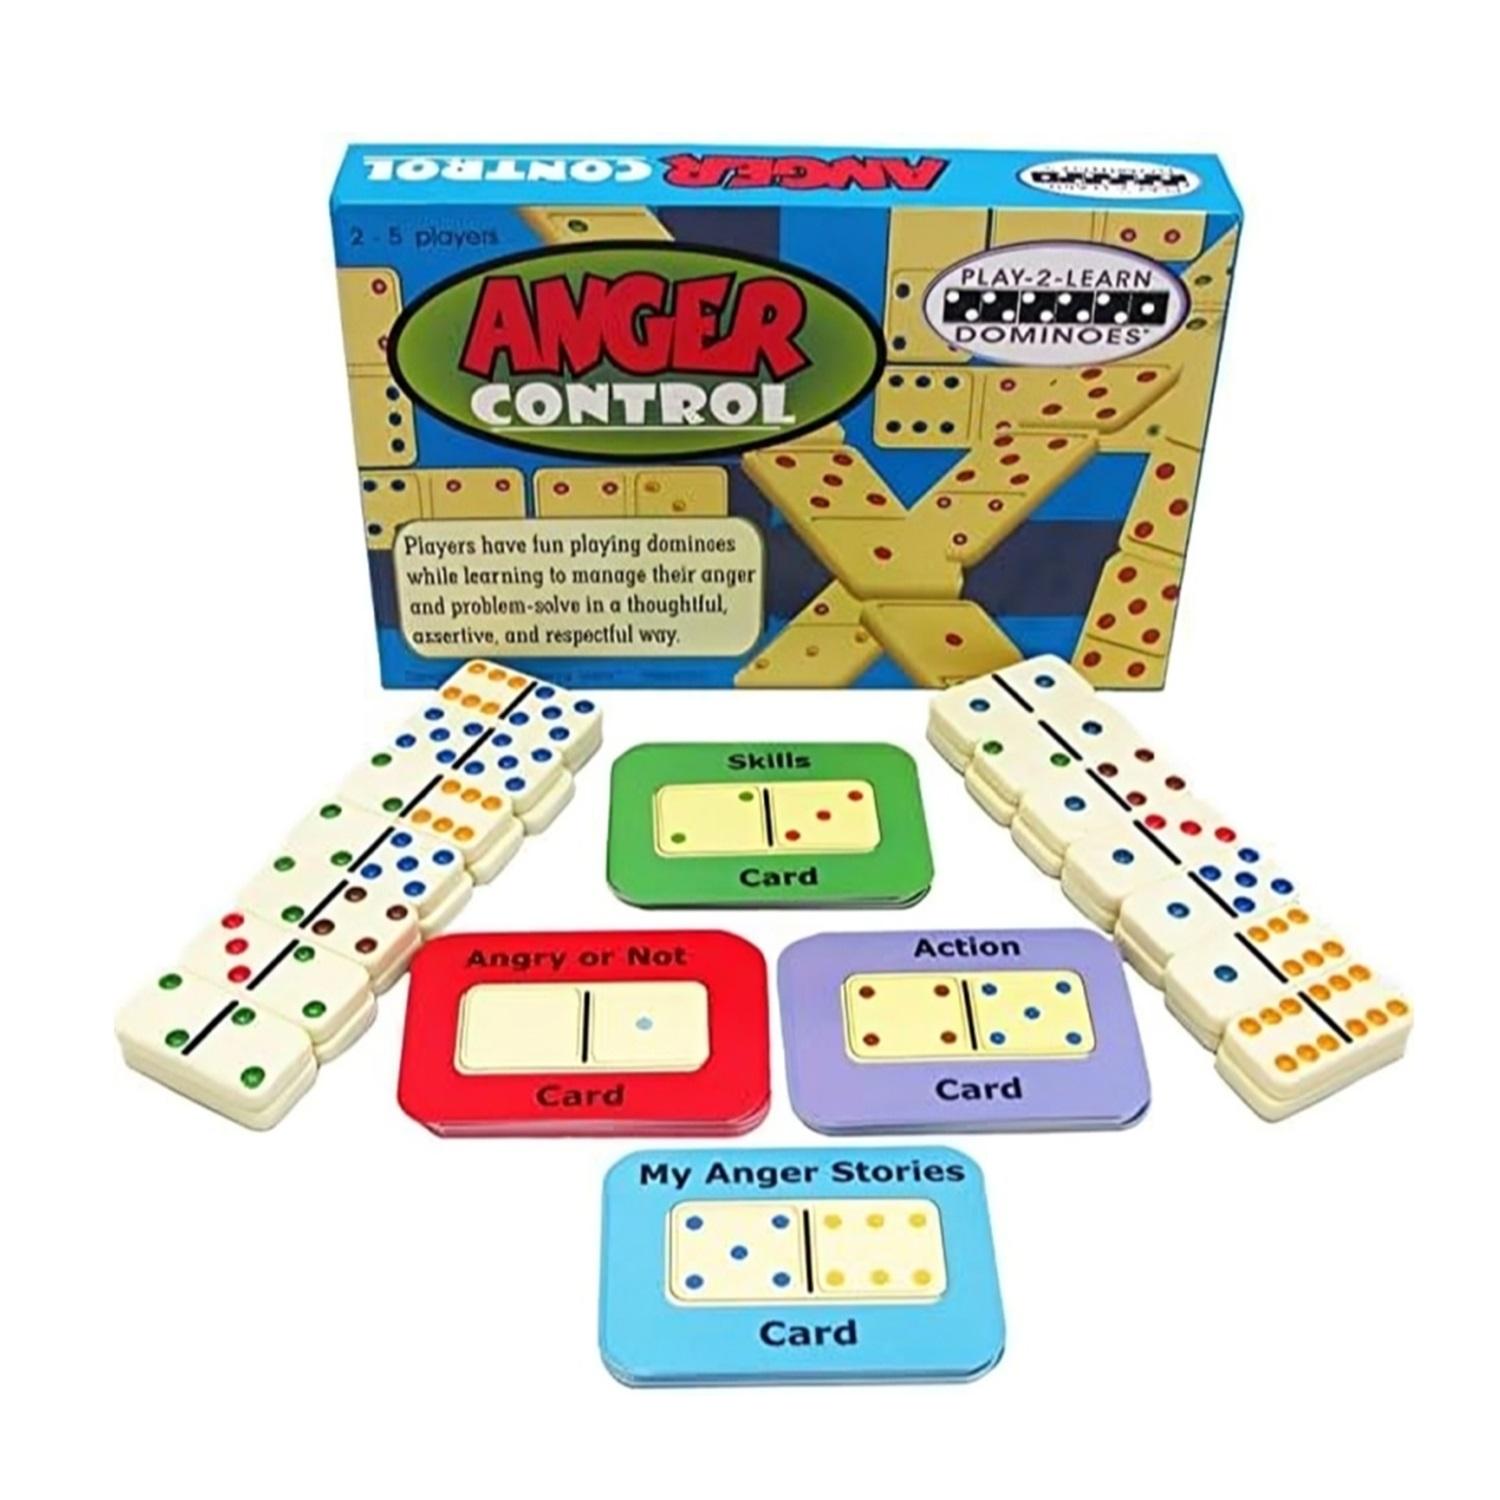 Montessori Franklin Learning Systems Conversational Game Anger Control Play-2-Learn Dominoes